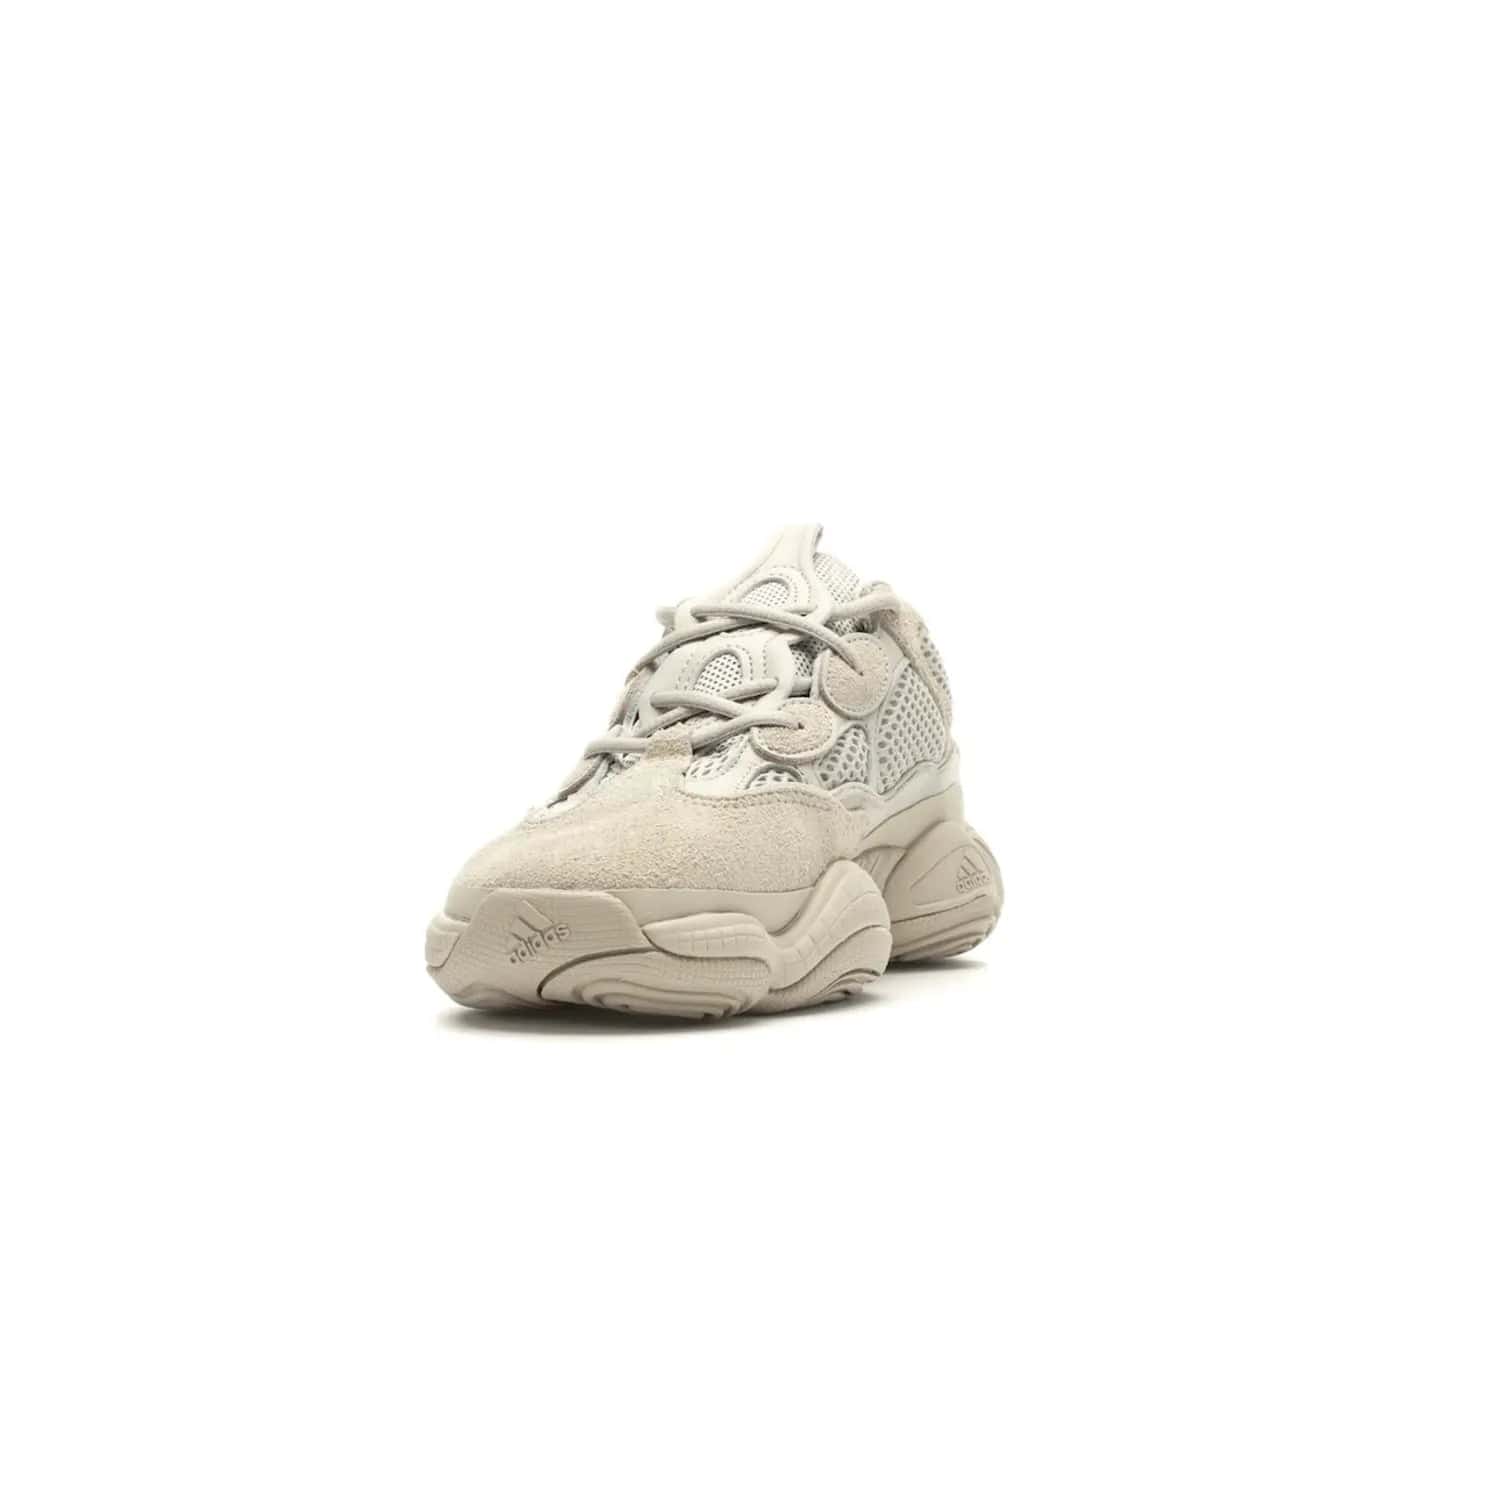 adidas Yeezy 500 Blush - Image 12 - Only at www.BallersClubKickz.com - Step up your sneaker game with the Adidas Yeezy 500 Blush. Monochromatic pale pink palette, hiking-inspired suede/mesh construction, plus adiPRENE sole for comfort and performance. Get the Adidas Yeezy 500 and experience true style and comfort.